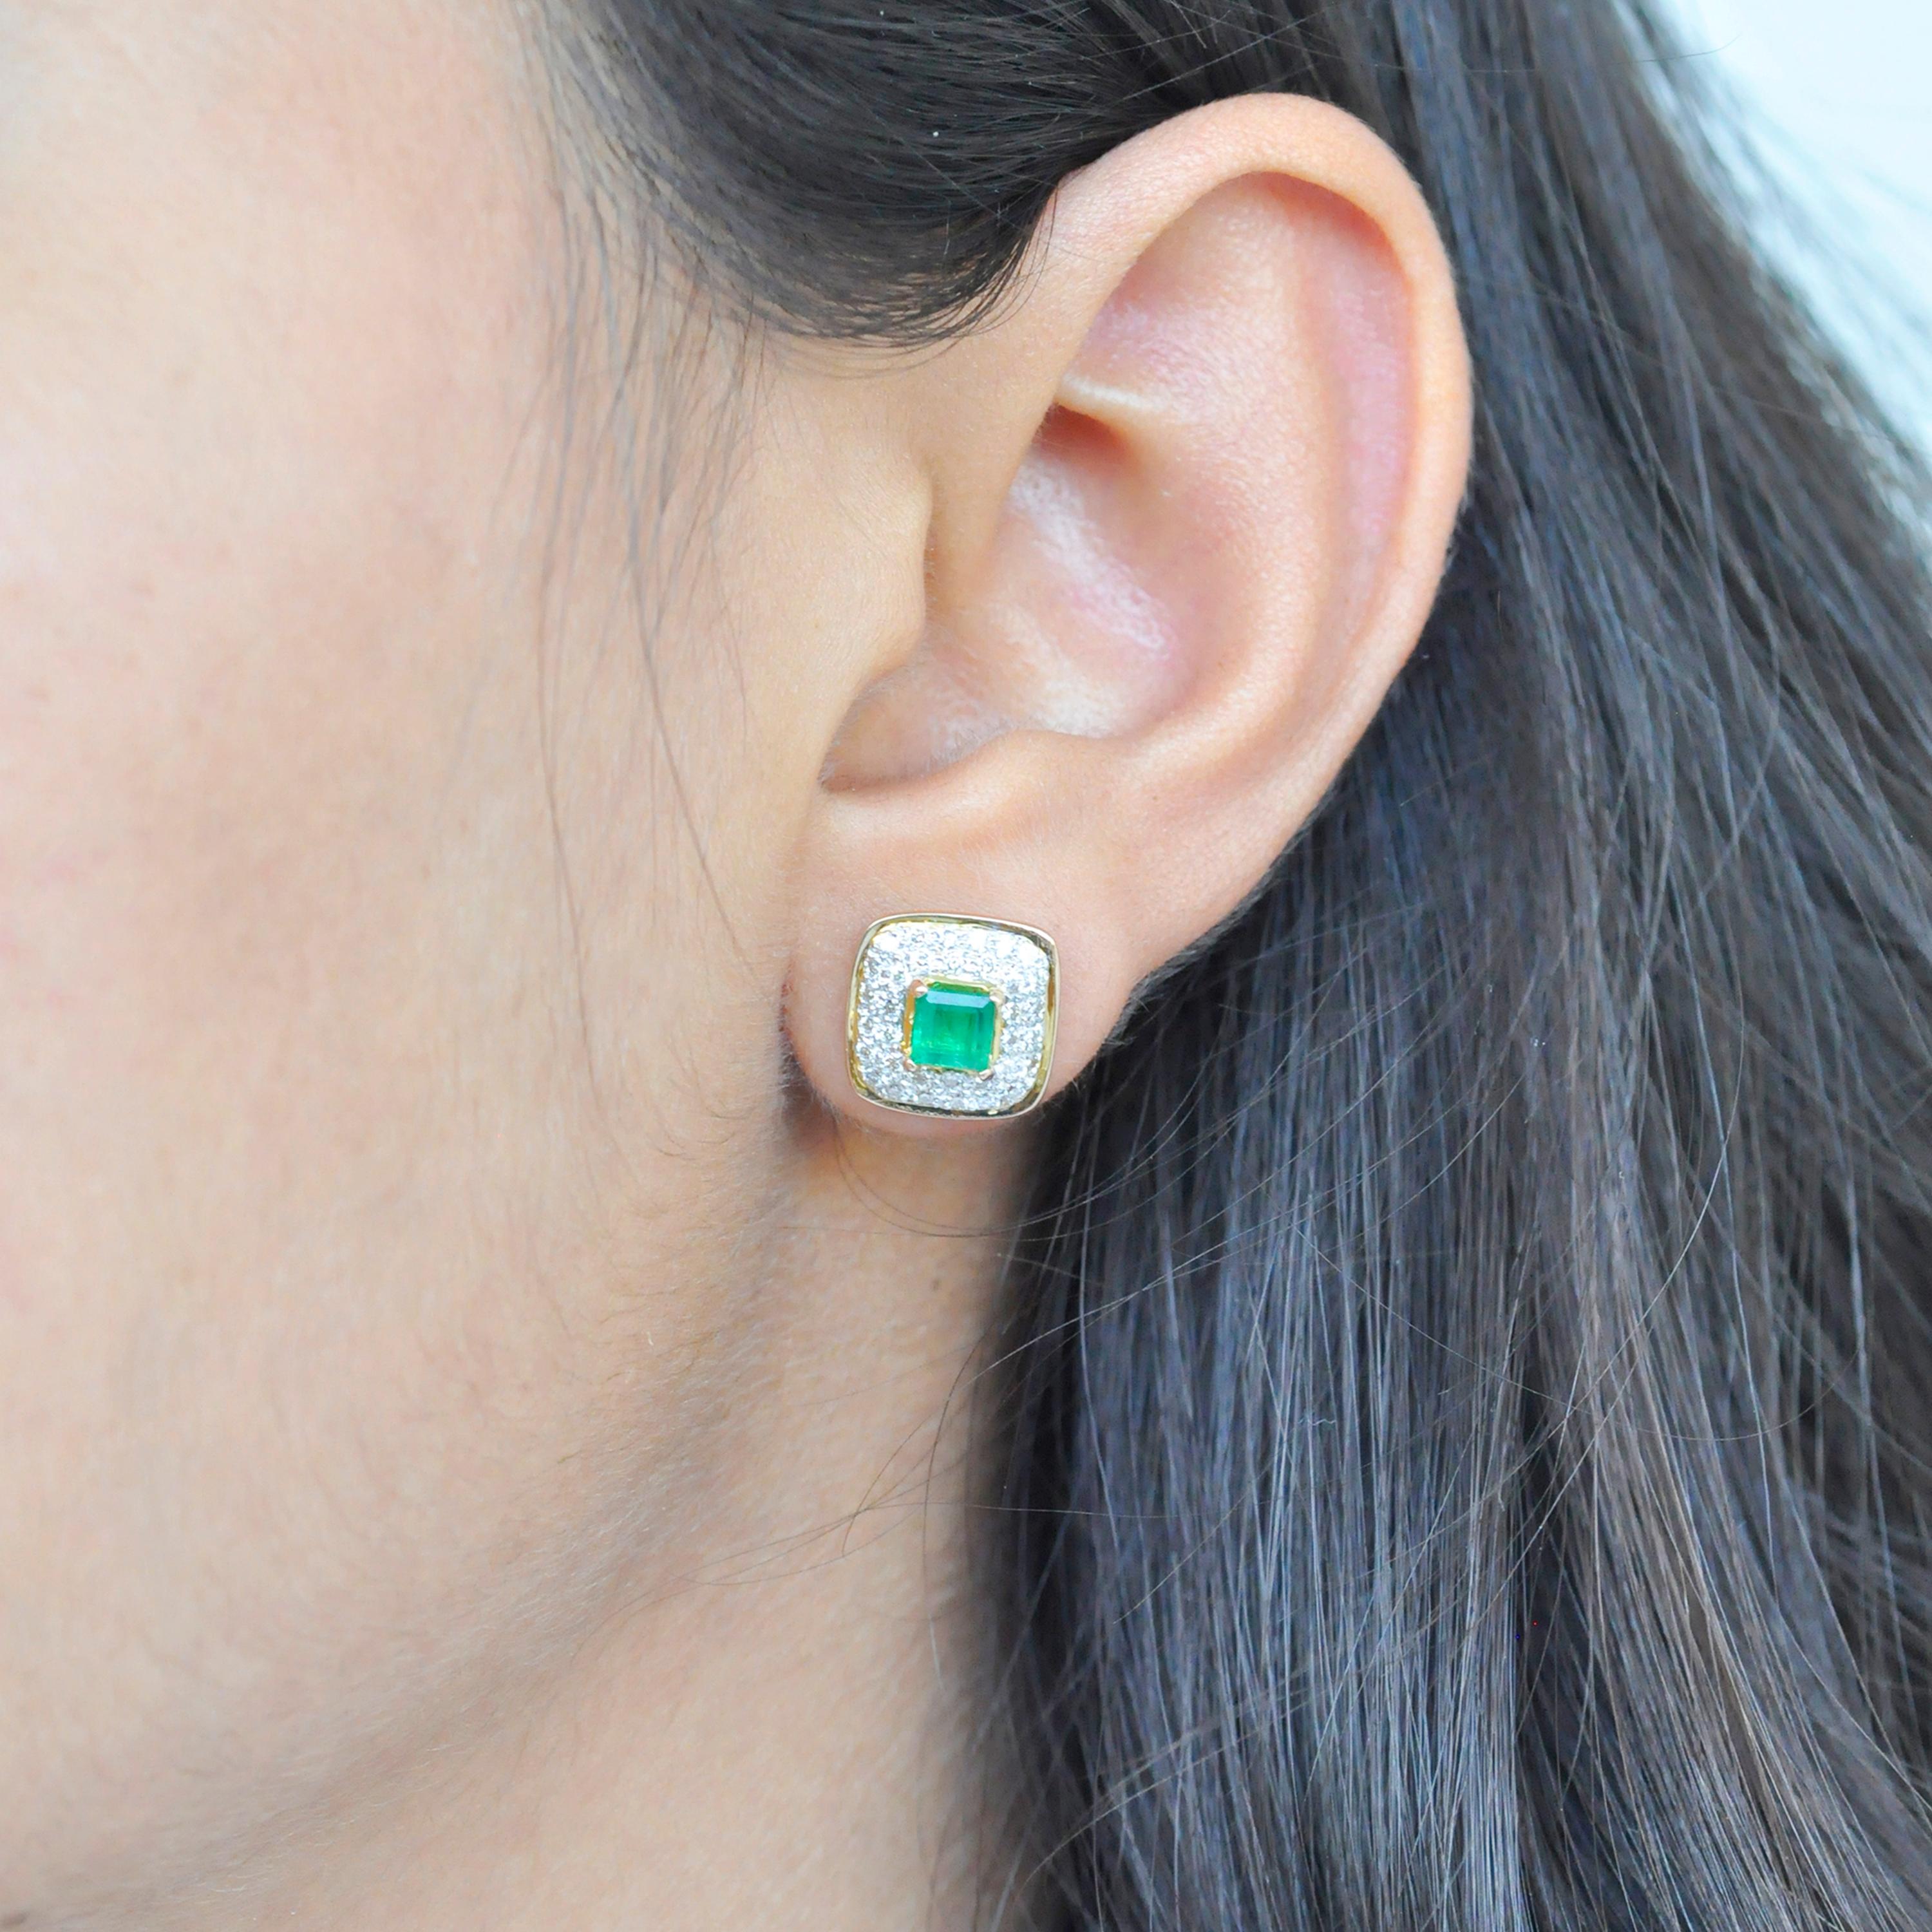 This exclusive diamond emerald studs are exemplary. The lustrous square zambian emeralds, 5mm in size, are encased within a layer of pave set diamonds on all sides, making it distinctive in its very form. This stud design is delicate yet chic that